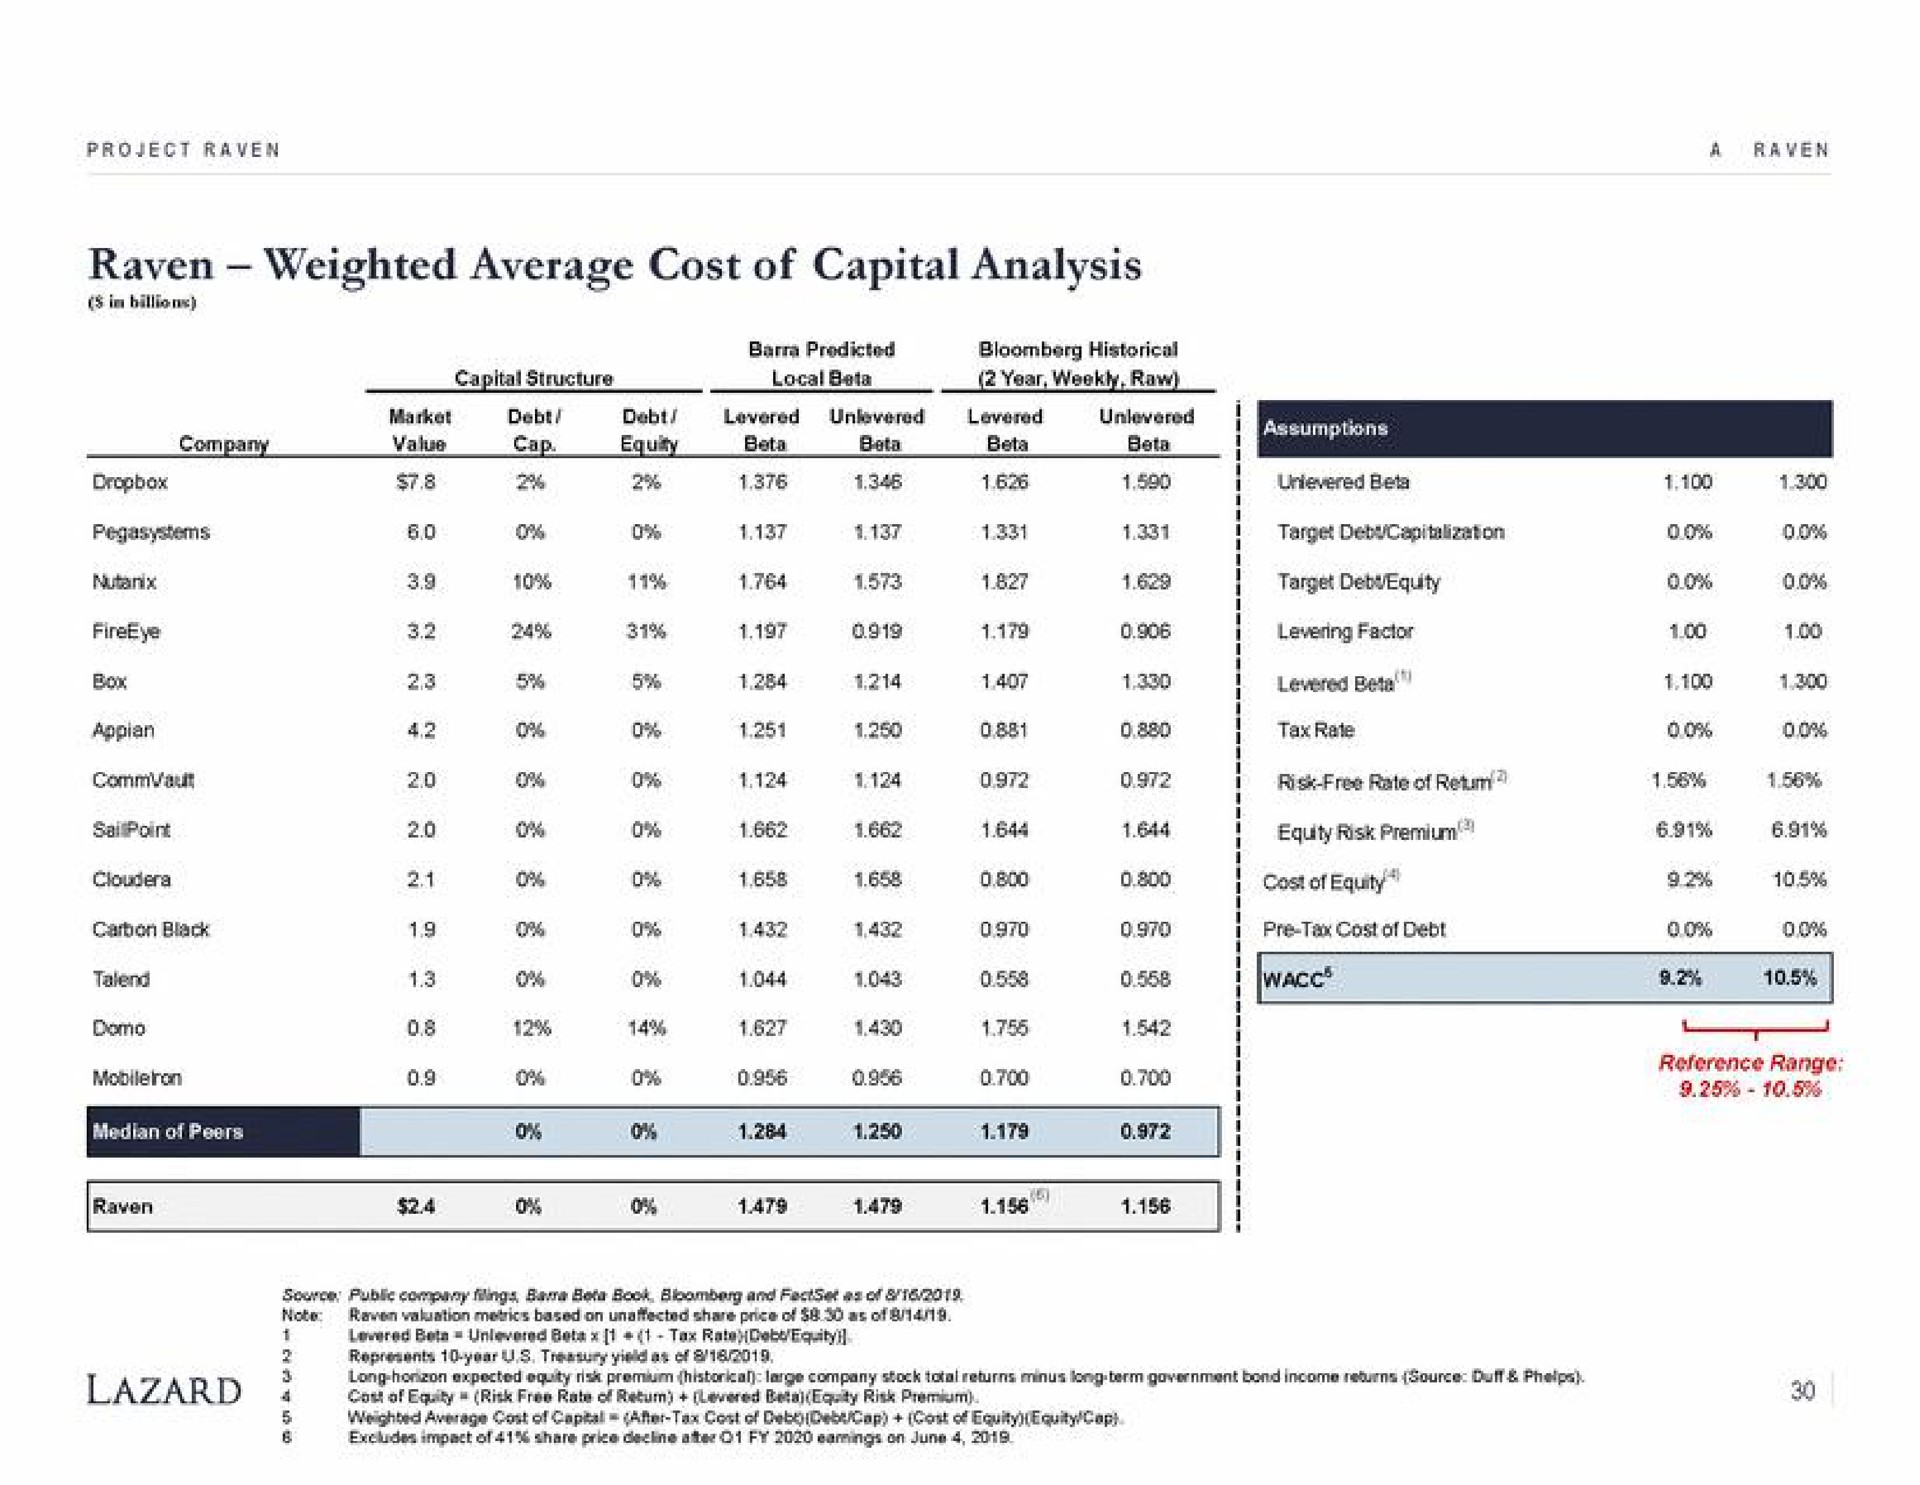 raven weighted average cost of capital analysis box beta beta bota value cap target levered beta a ons on | Lazard